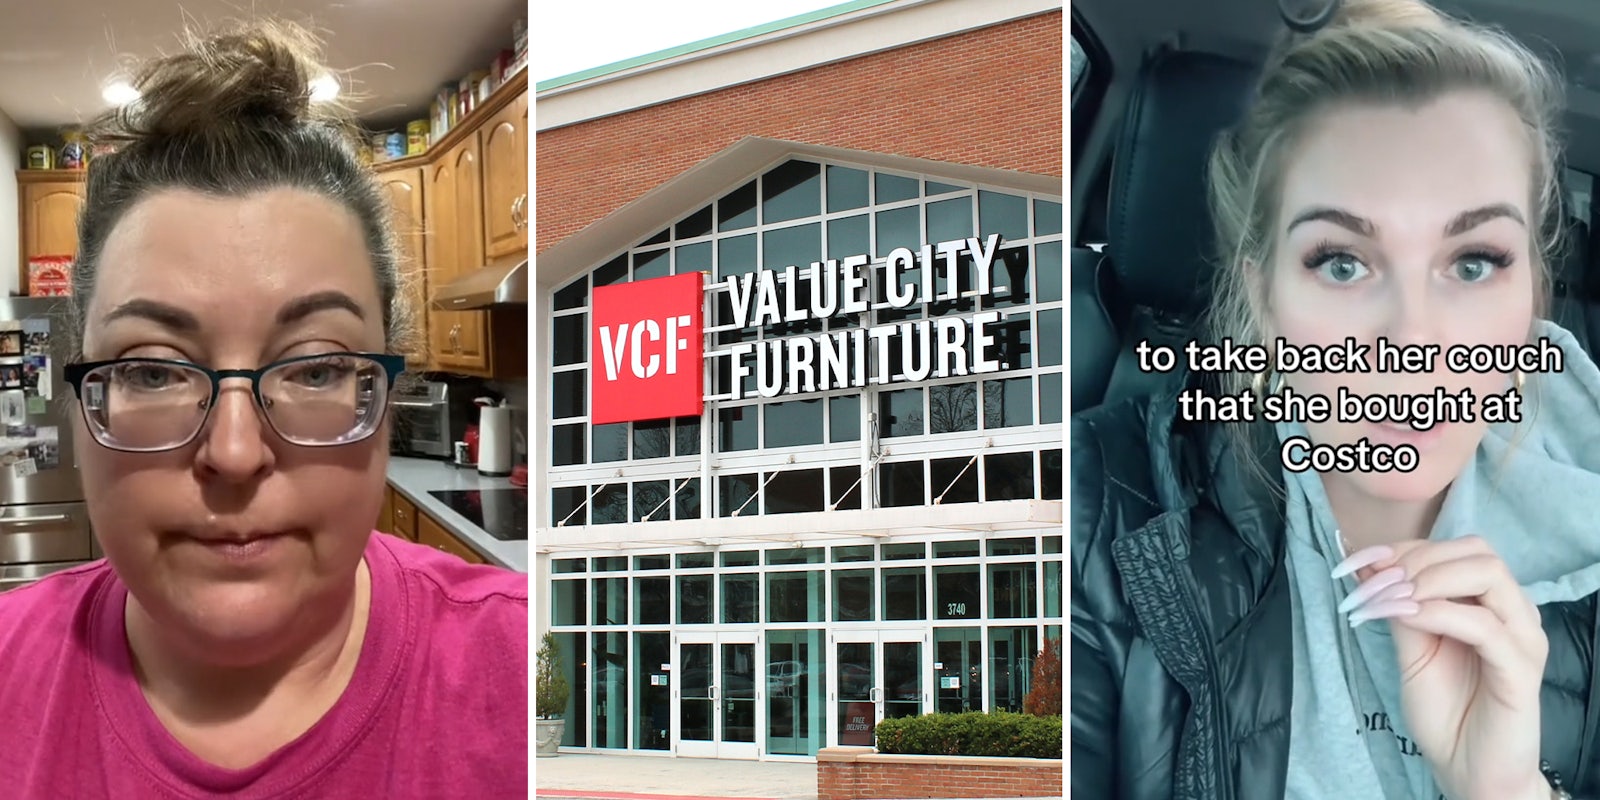 Value City Furniture shopper says they won't take back her table after she paid for warranty